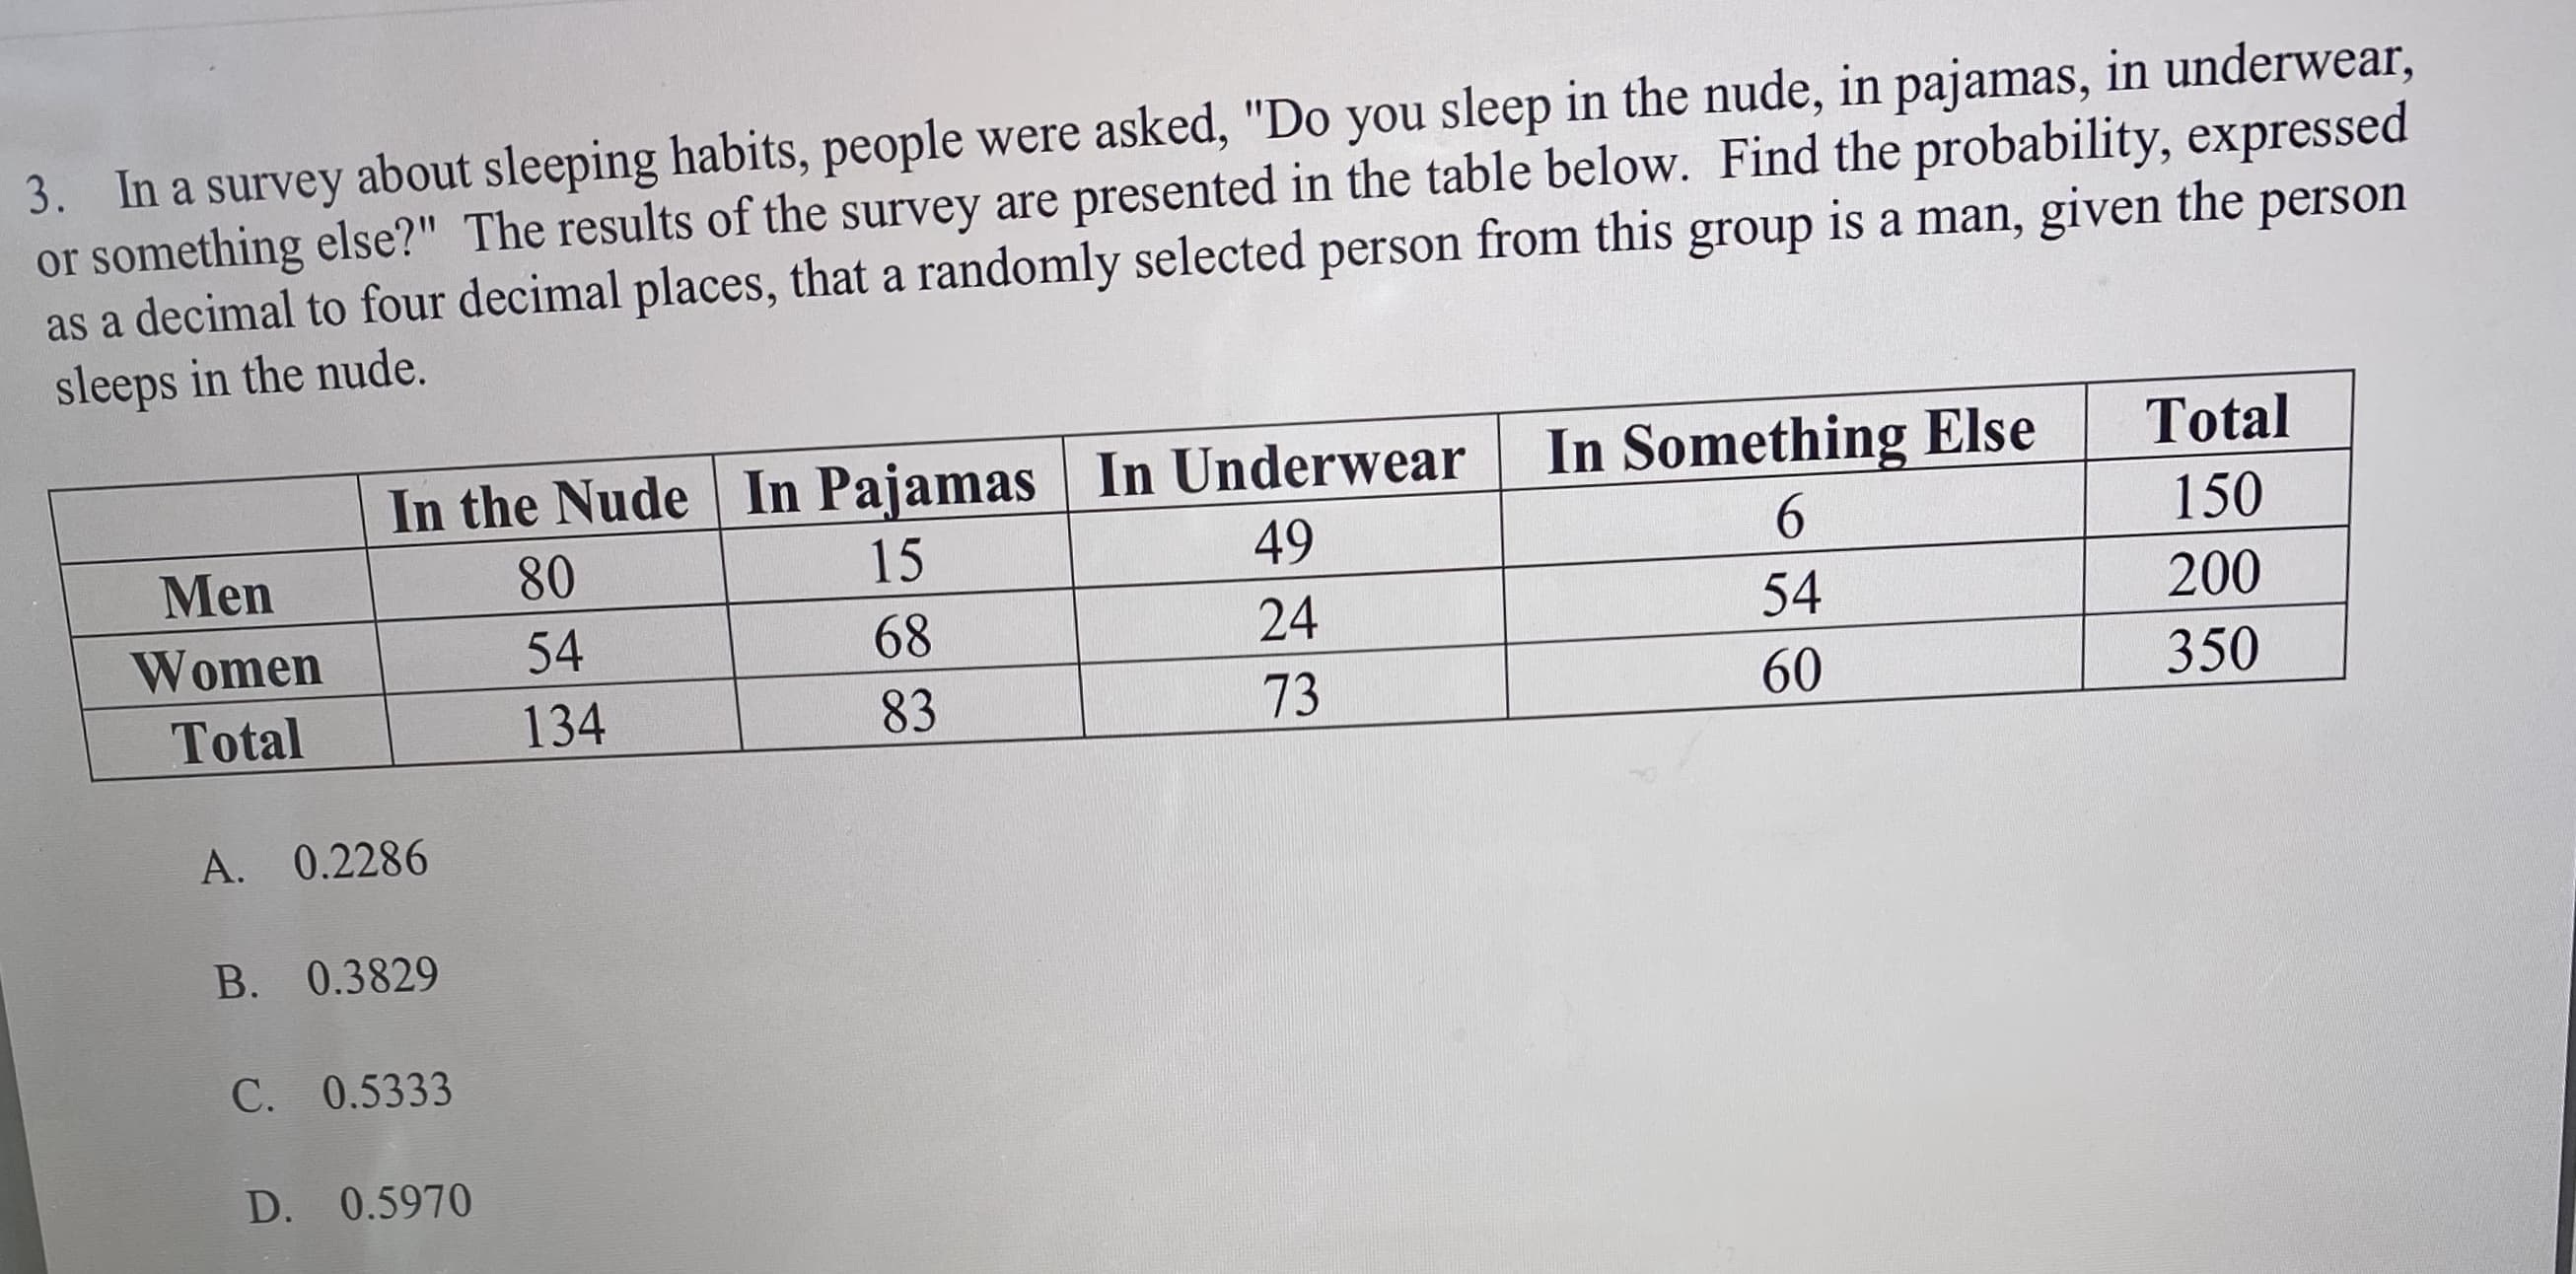 3. In a survey about sleeping habits, people were asked, "Do you sleep in the nude, in pajamas, in underwear,
or something else?" The results of the survey are presented in the table below. Find the probability, expressed
as a decimal to four decimal places, that a randomly selected person from this group is a man, given the person
sleeps in the nude.
In Something Else
6.
Total
In the Nude In Pajamas In Underwear
15
Men
80
49
150
Women
54
68
24
54
200
Total
134
83
73
60
350
A. 0.2286
B. 0.3829
C. 0.5333
D. 0.5970
